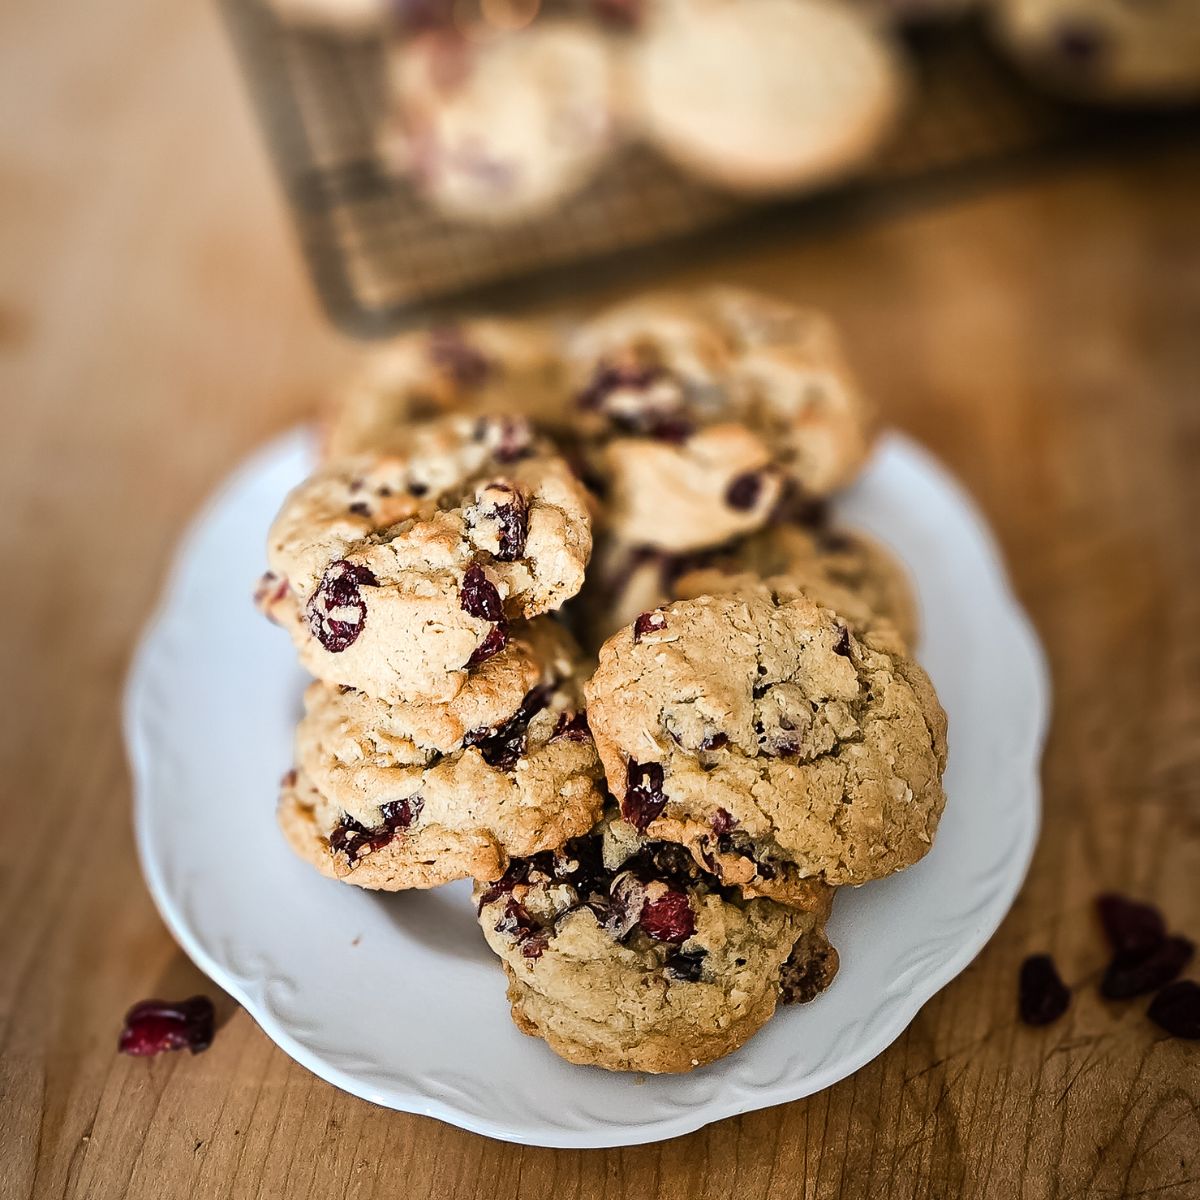 An ironstone plate with a pile of freshly baked Cranberry Oatmeal cookies.